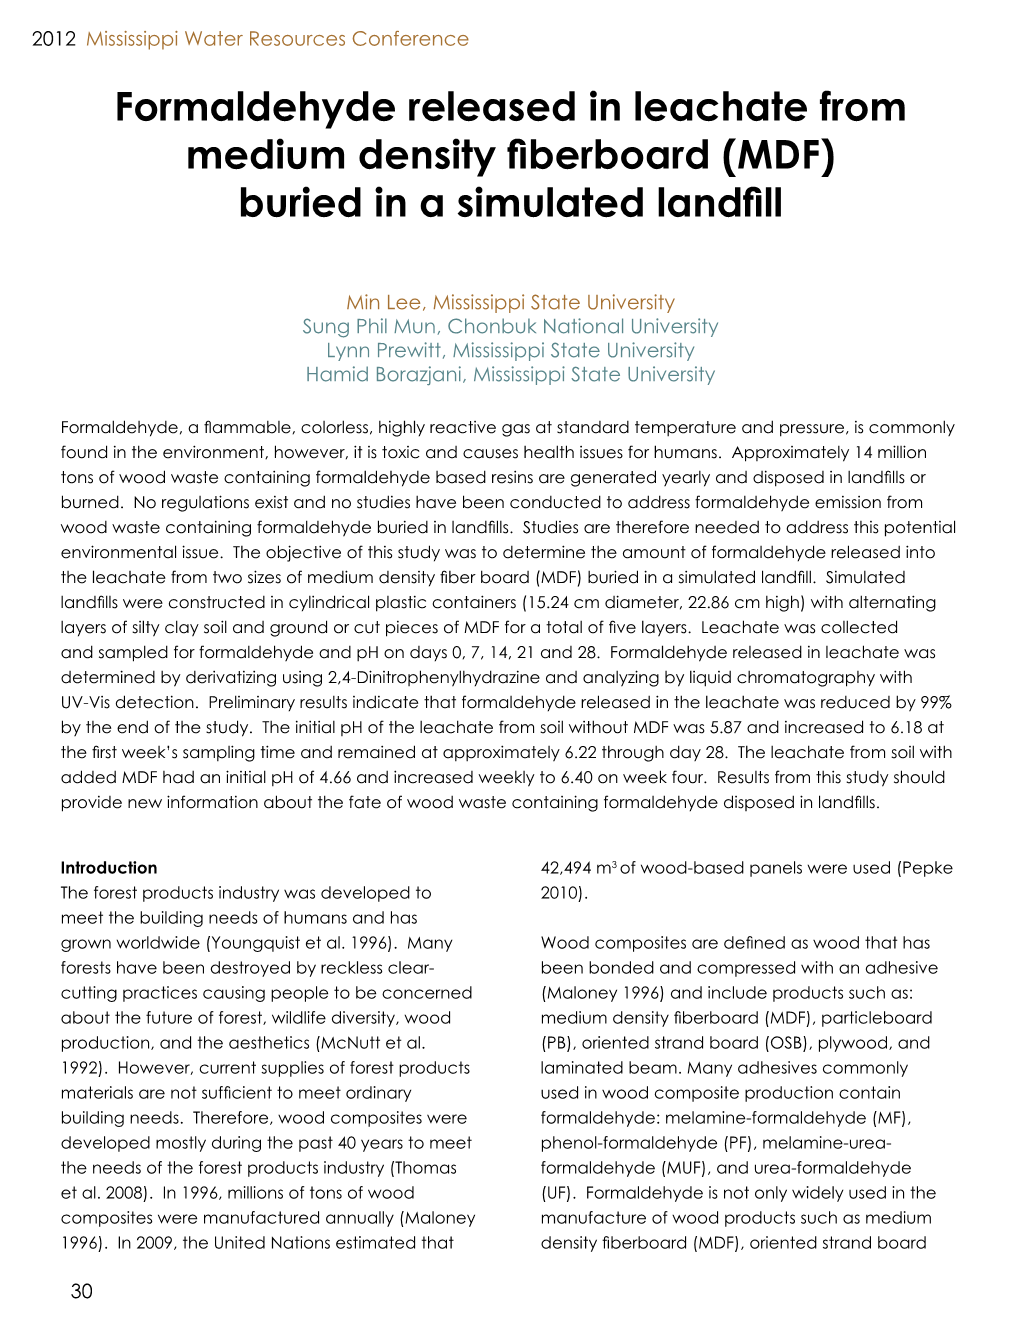 Formaldehyde Released in Leachate from Medium Density Fiberboard (MDF) Buried in a Simulated Landfill